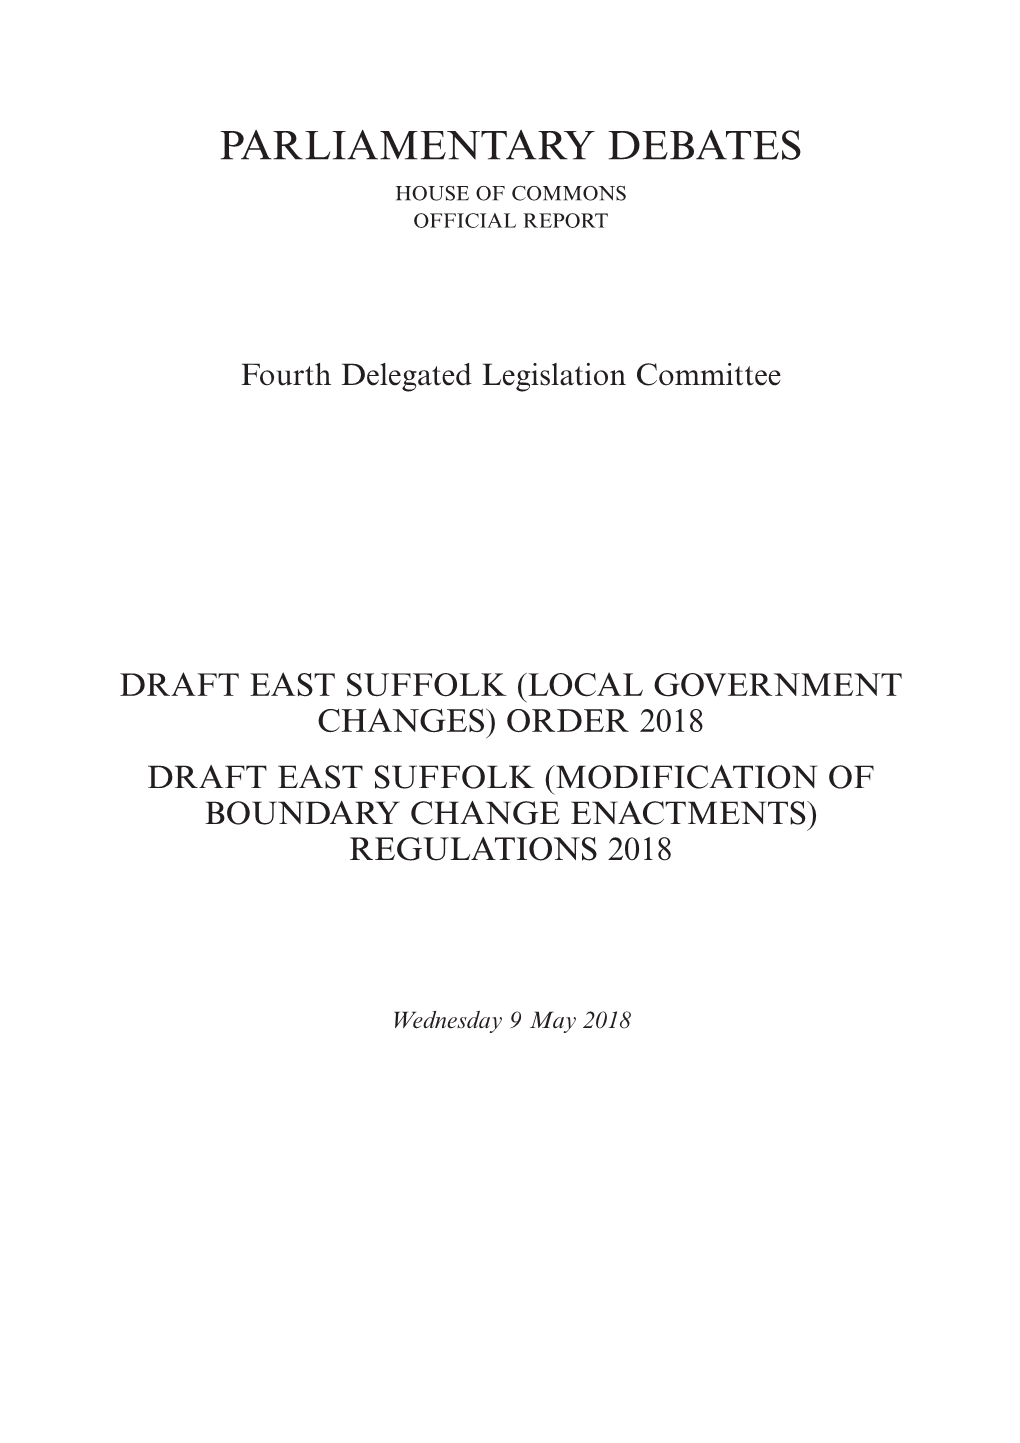 Draft East Suffolk (Local Government Changes) Order 2018 Draft East Suffolk (Modification of Boundary Change Enactments) Regulations 2018